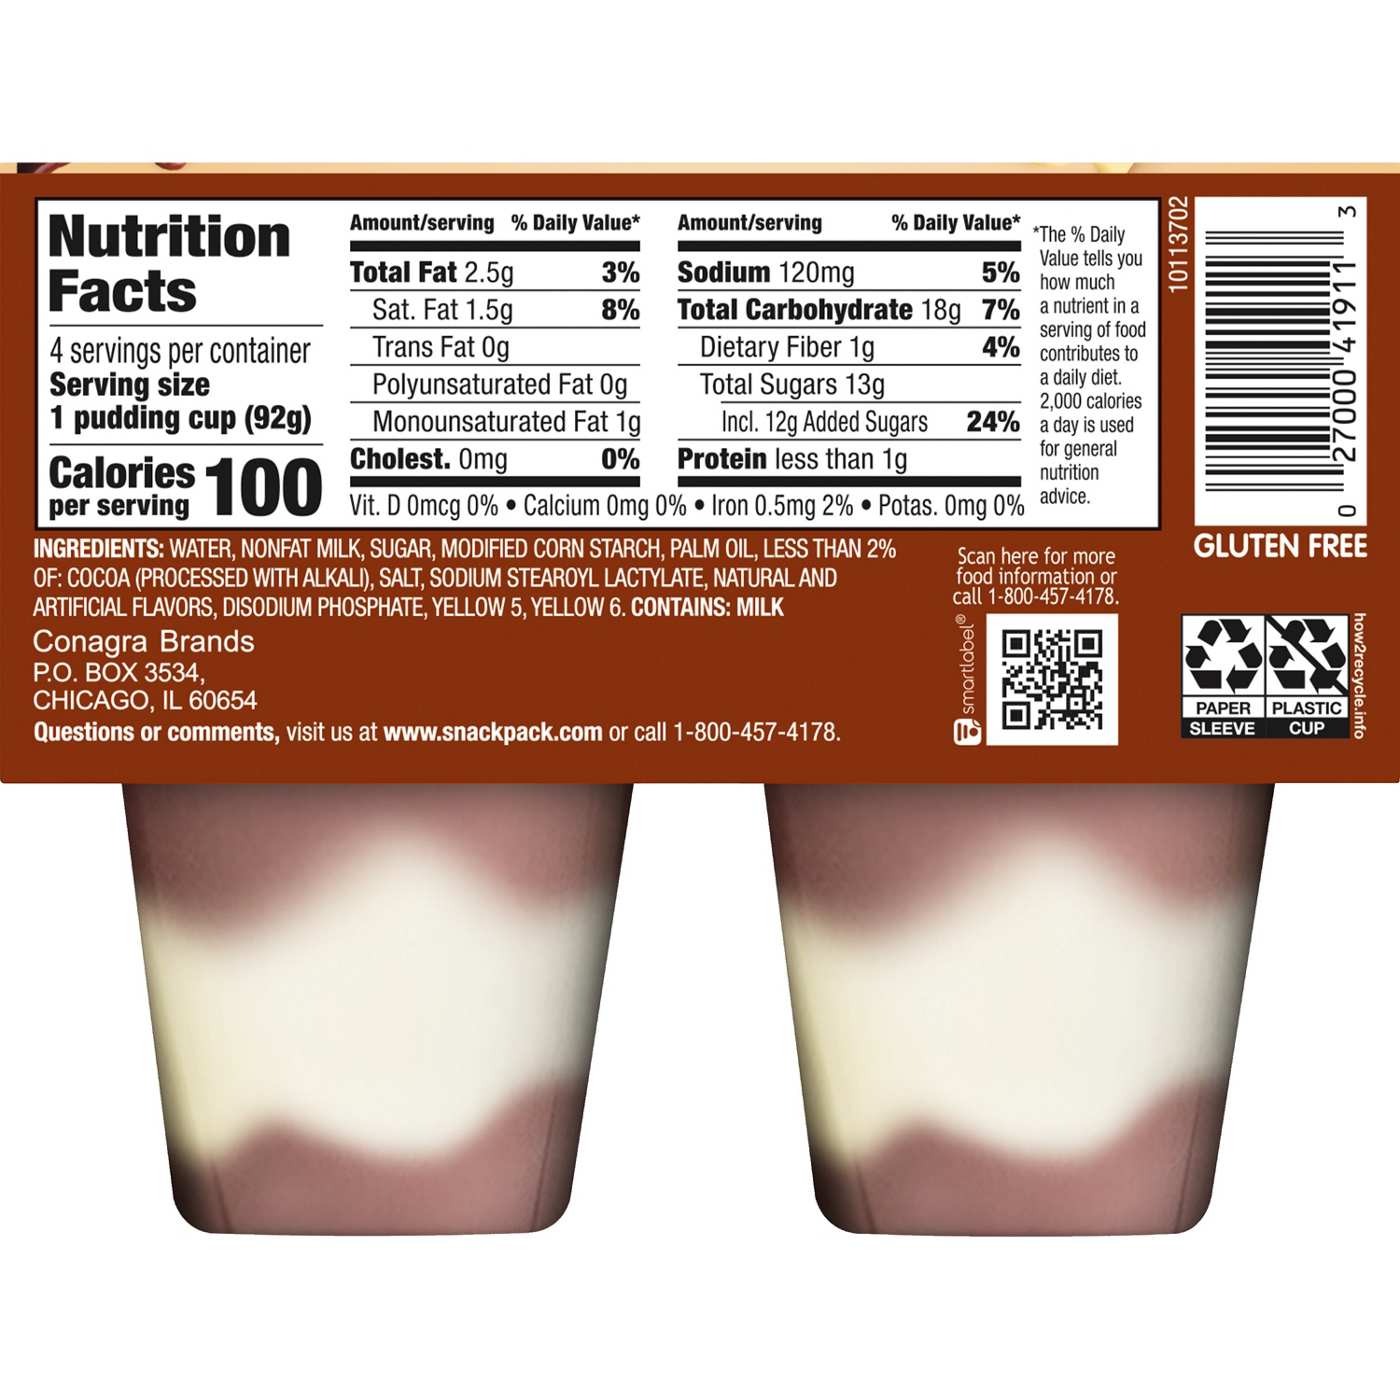 Snack Pack Chocolate Vanilla Pudding Cups; image 7 of 7